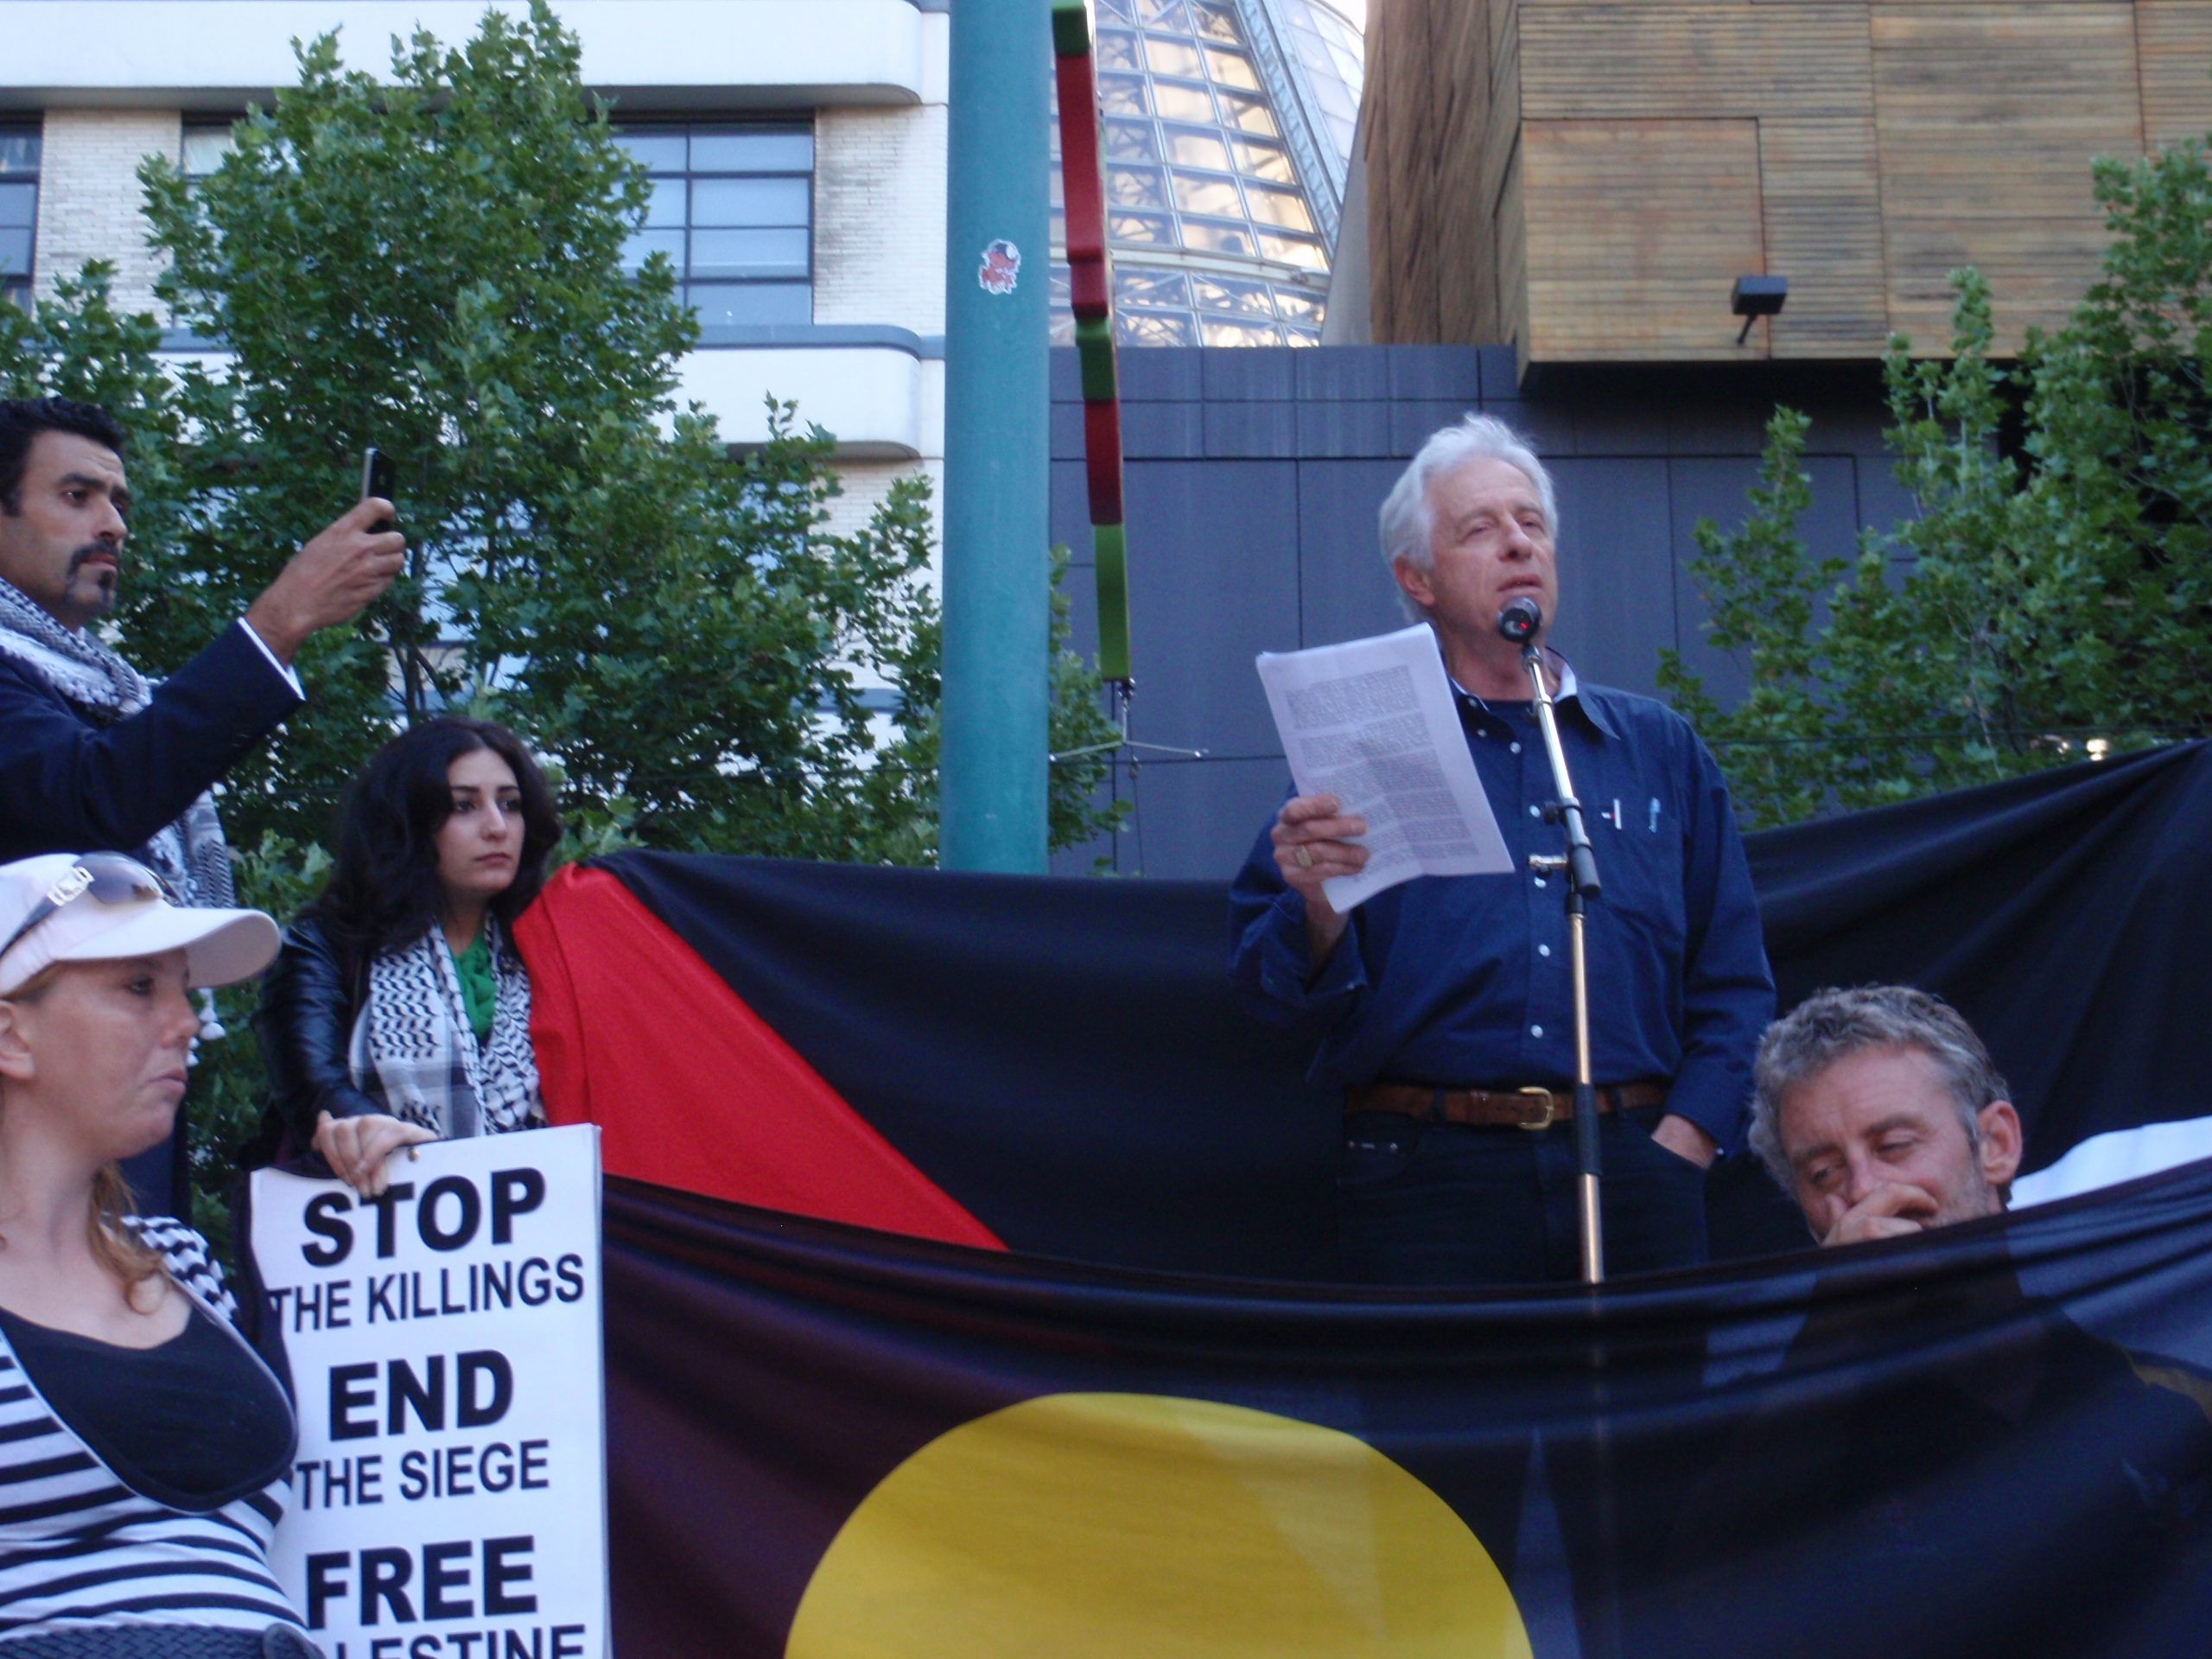 Phot of Peter Slezak speaking at protest rally